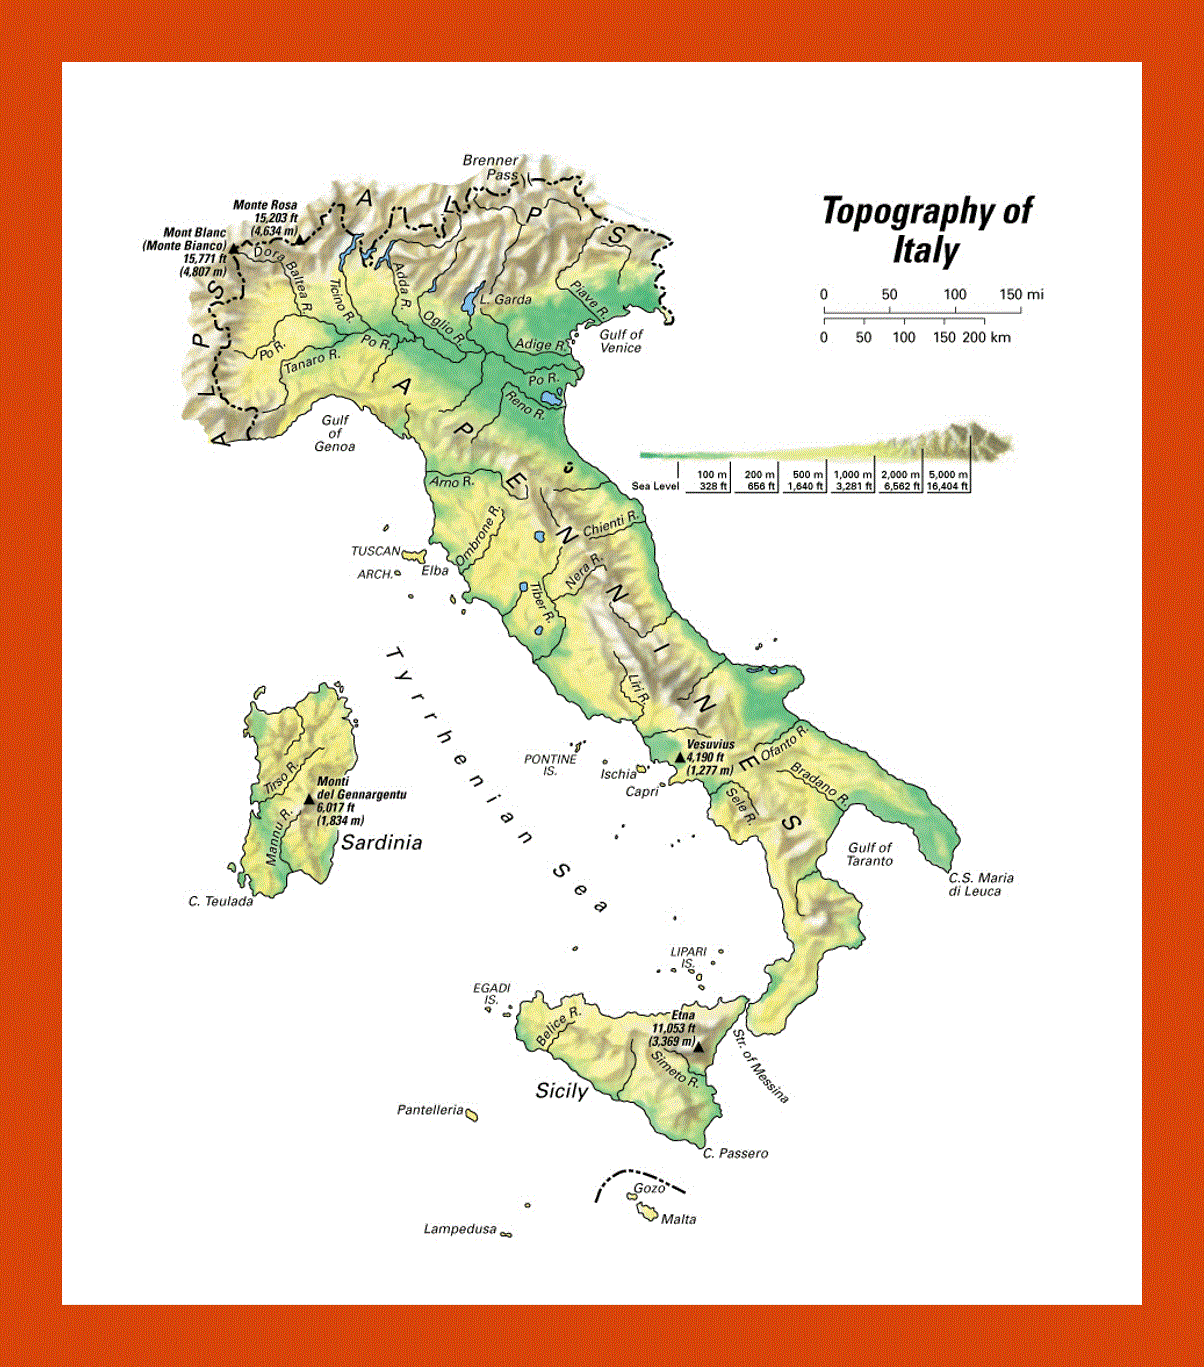 Topography map of Italy